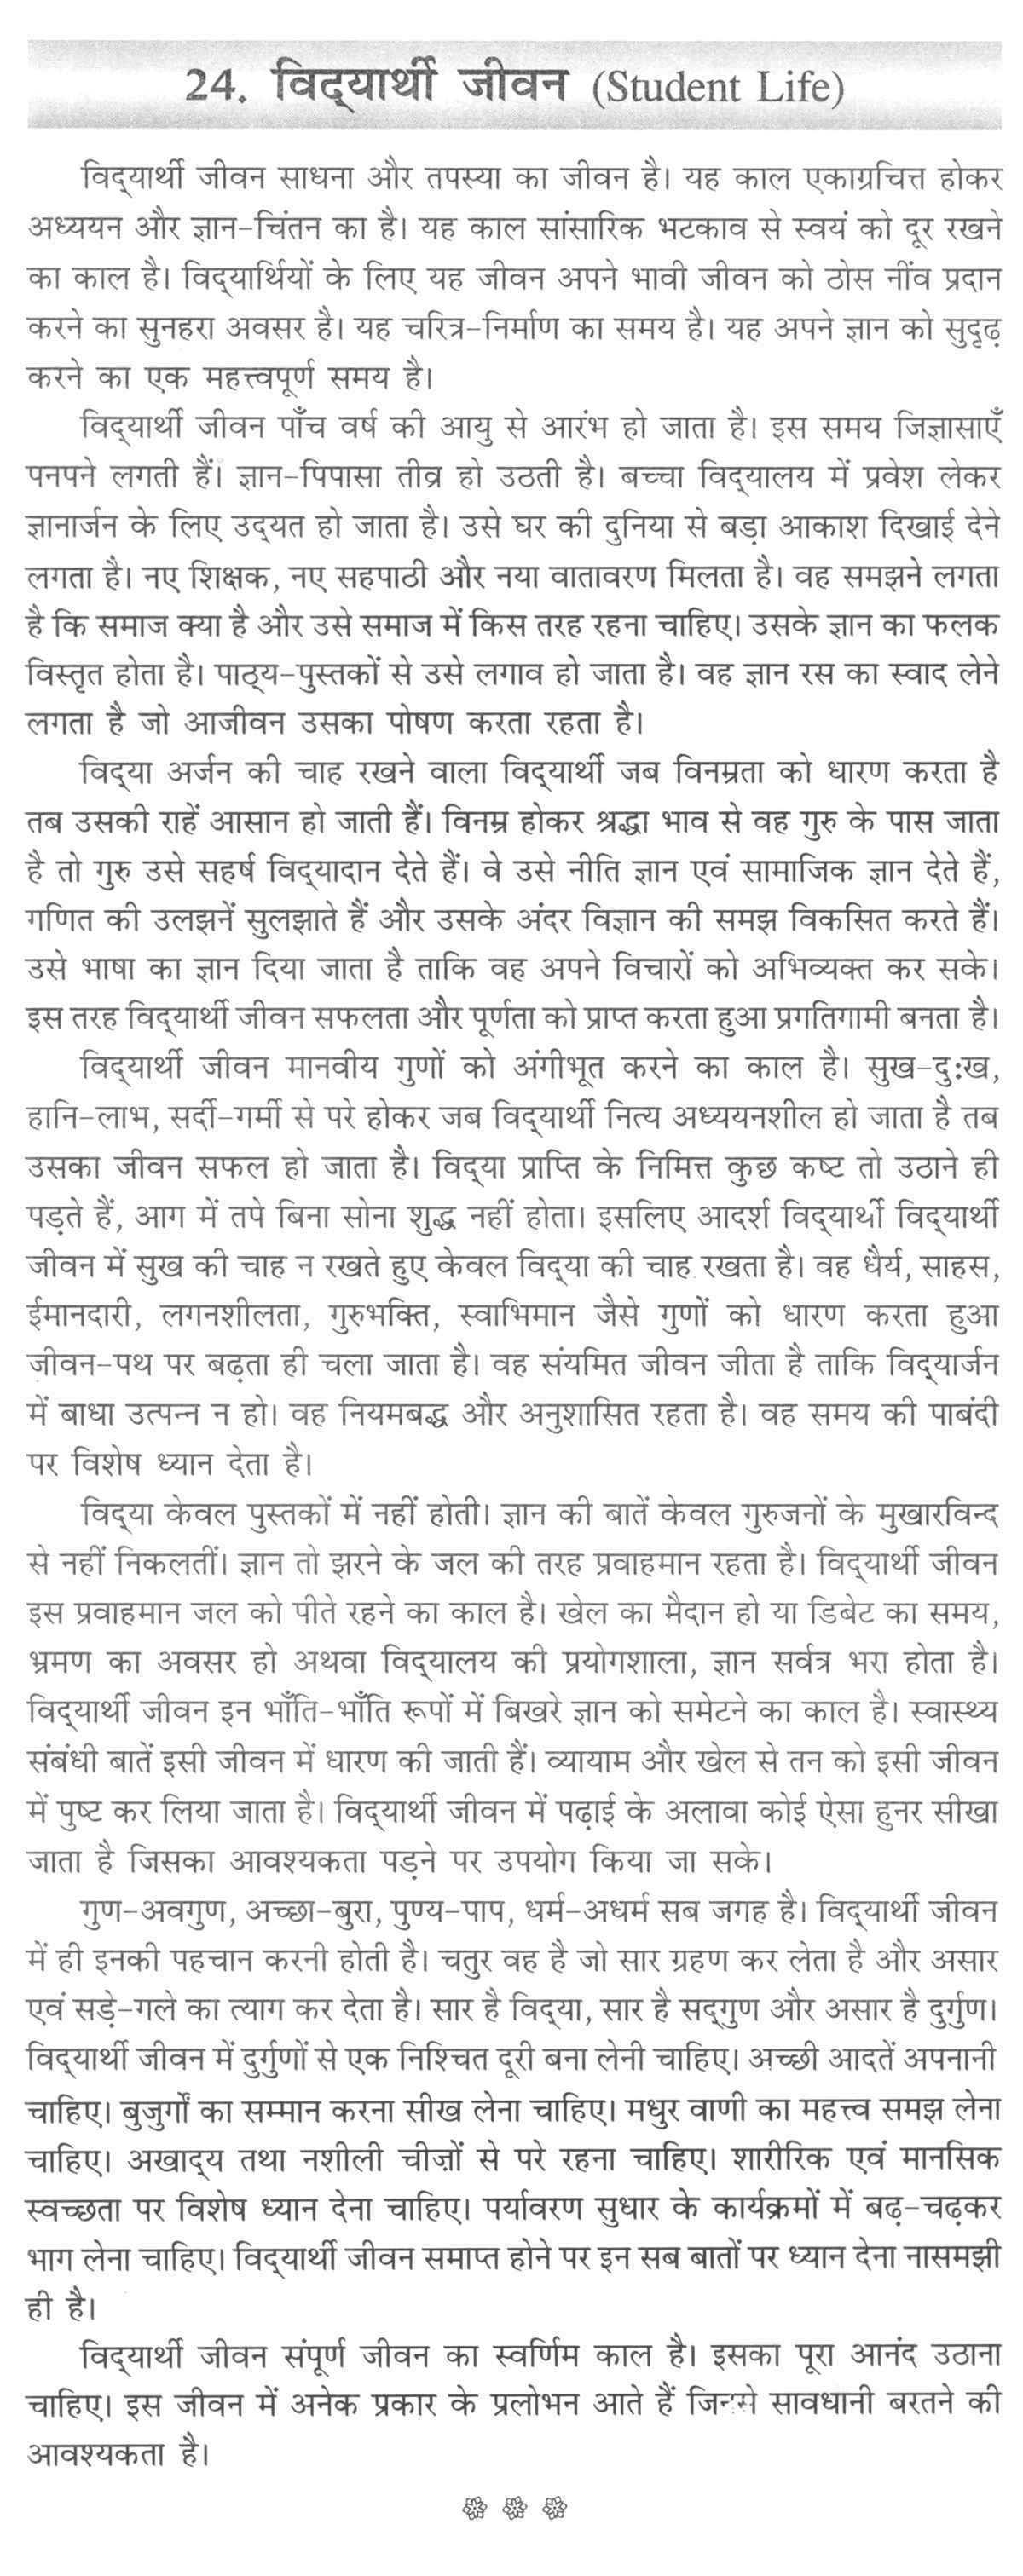 Essay on student life and discipline in hindi